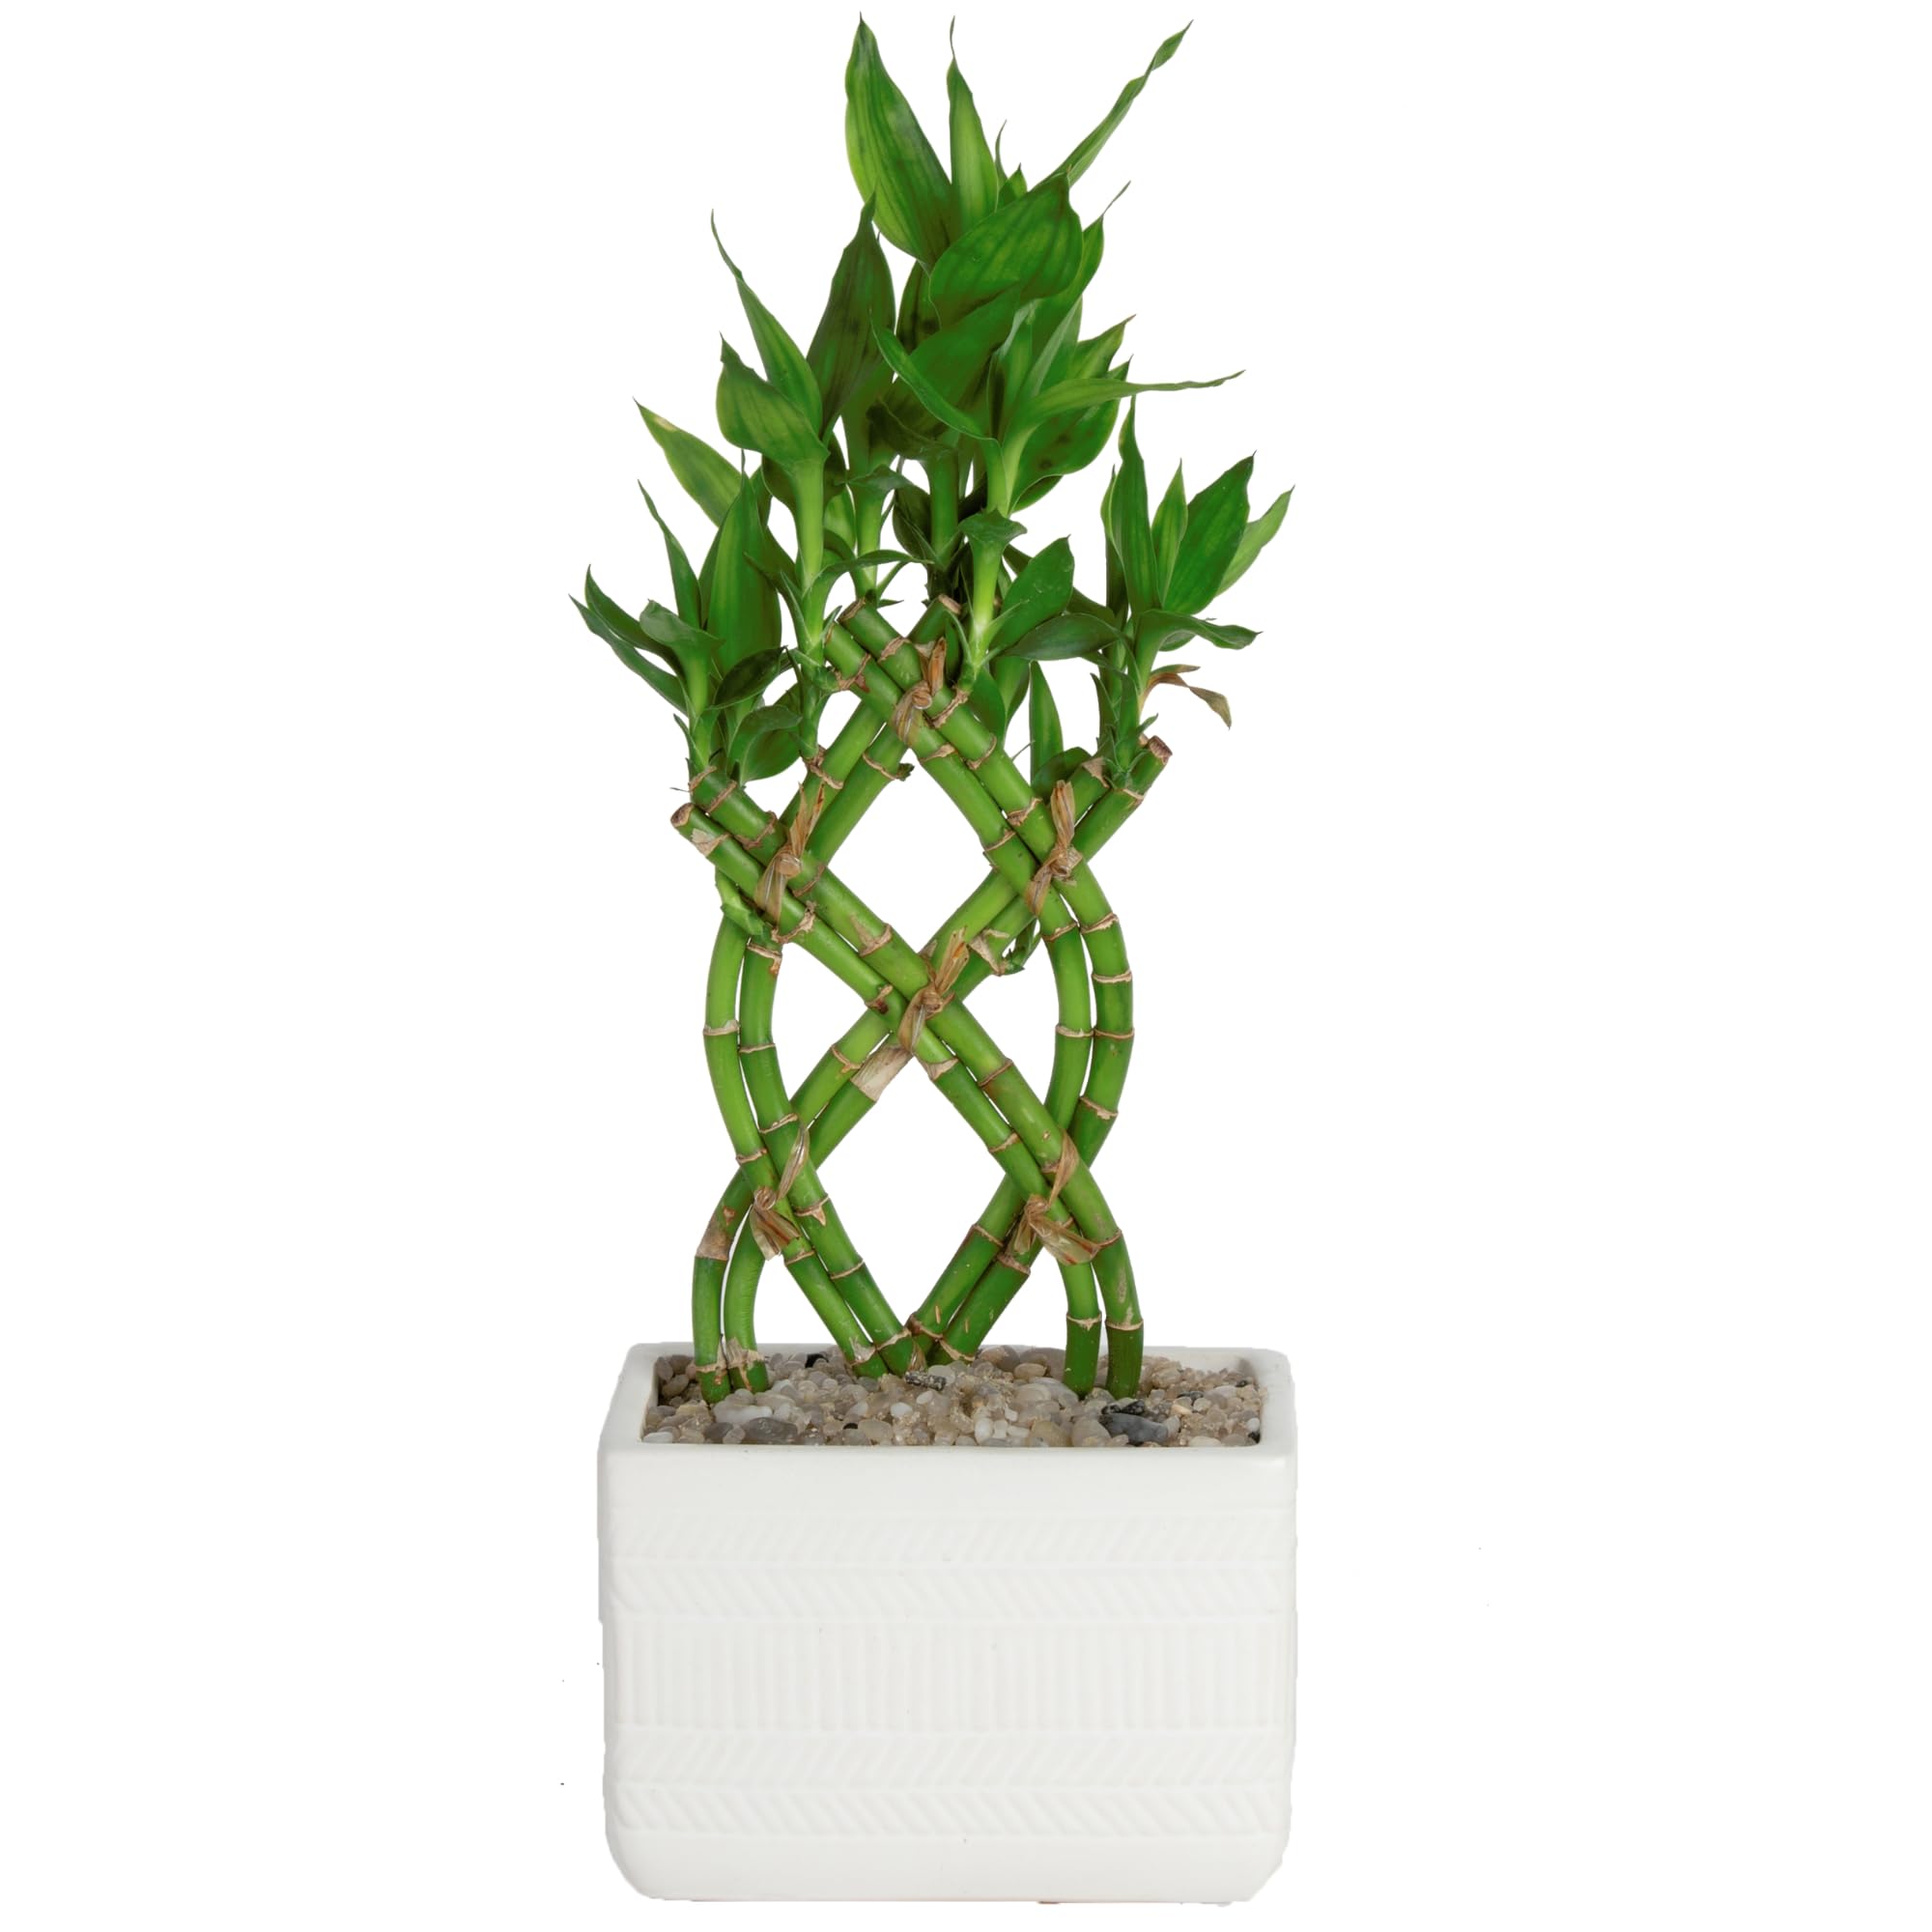 12" Tall Costa Farms Lucky Bamboo Live Indoor Houseplant in Ceramic Planter Pot $18.10 + Free Shipping w/ Prime